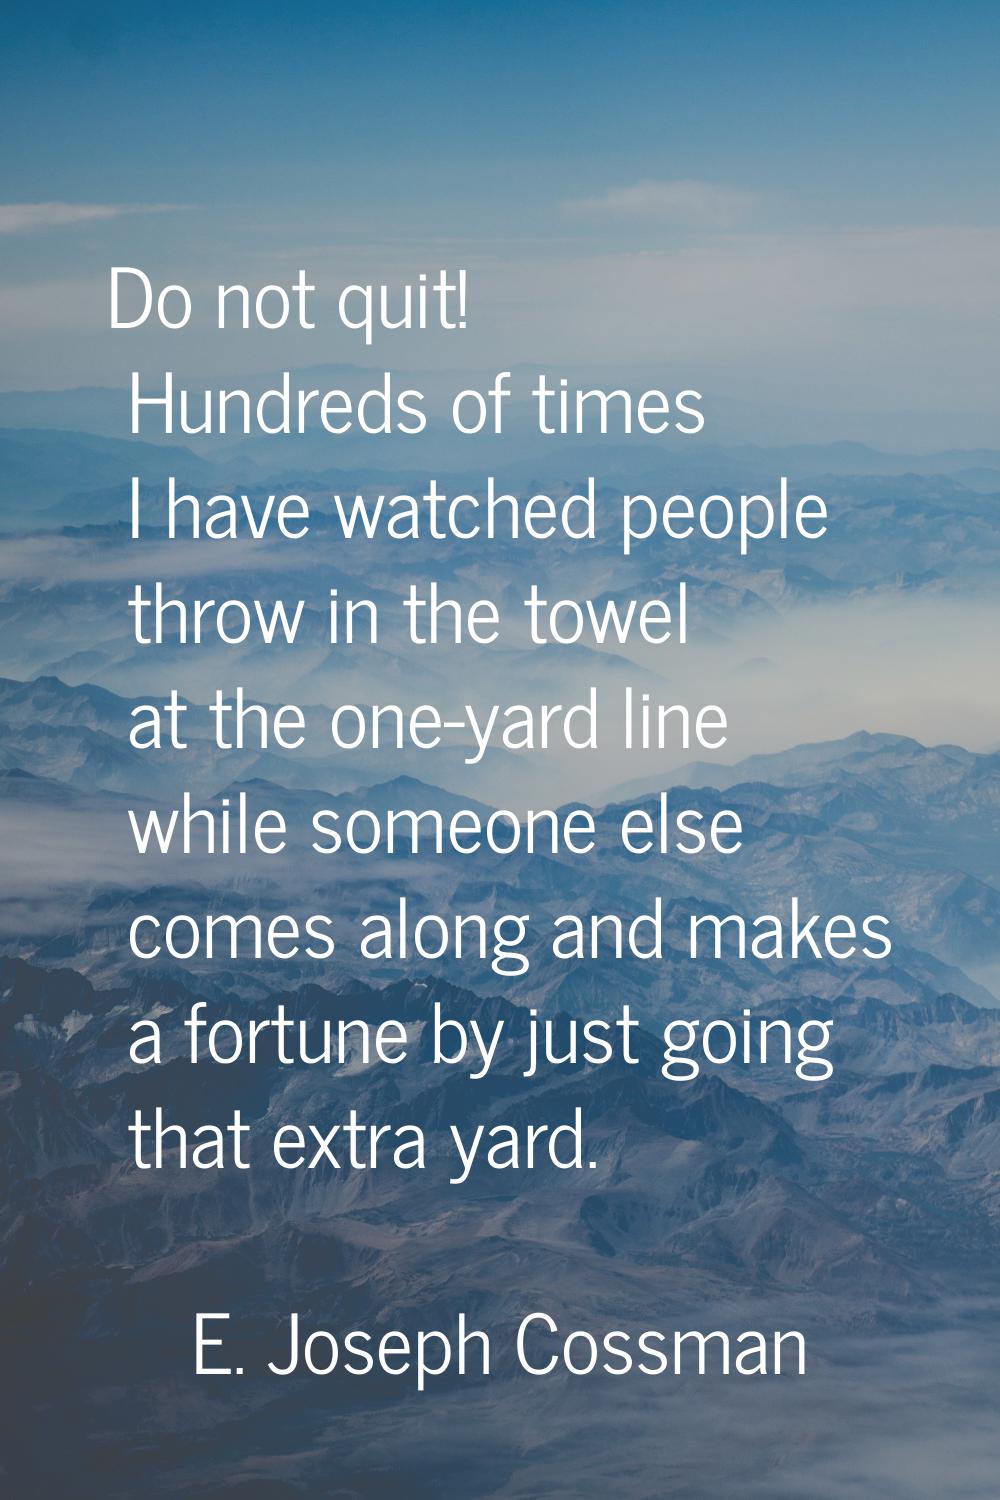 Do not quit! Hundreds of times I have watched people throw in the towel at the one-yard line while 